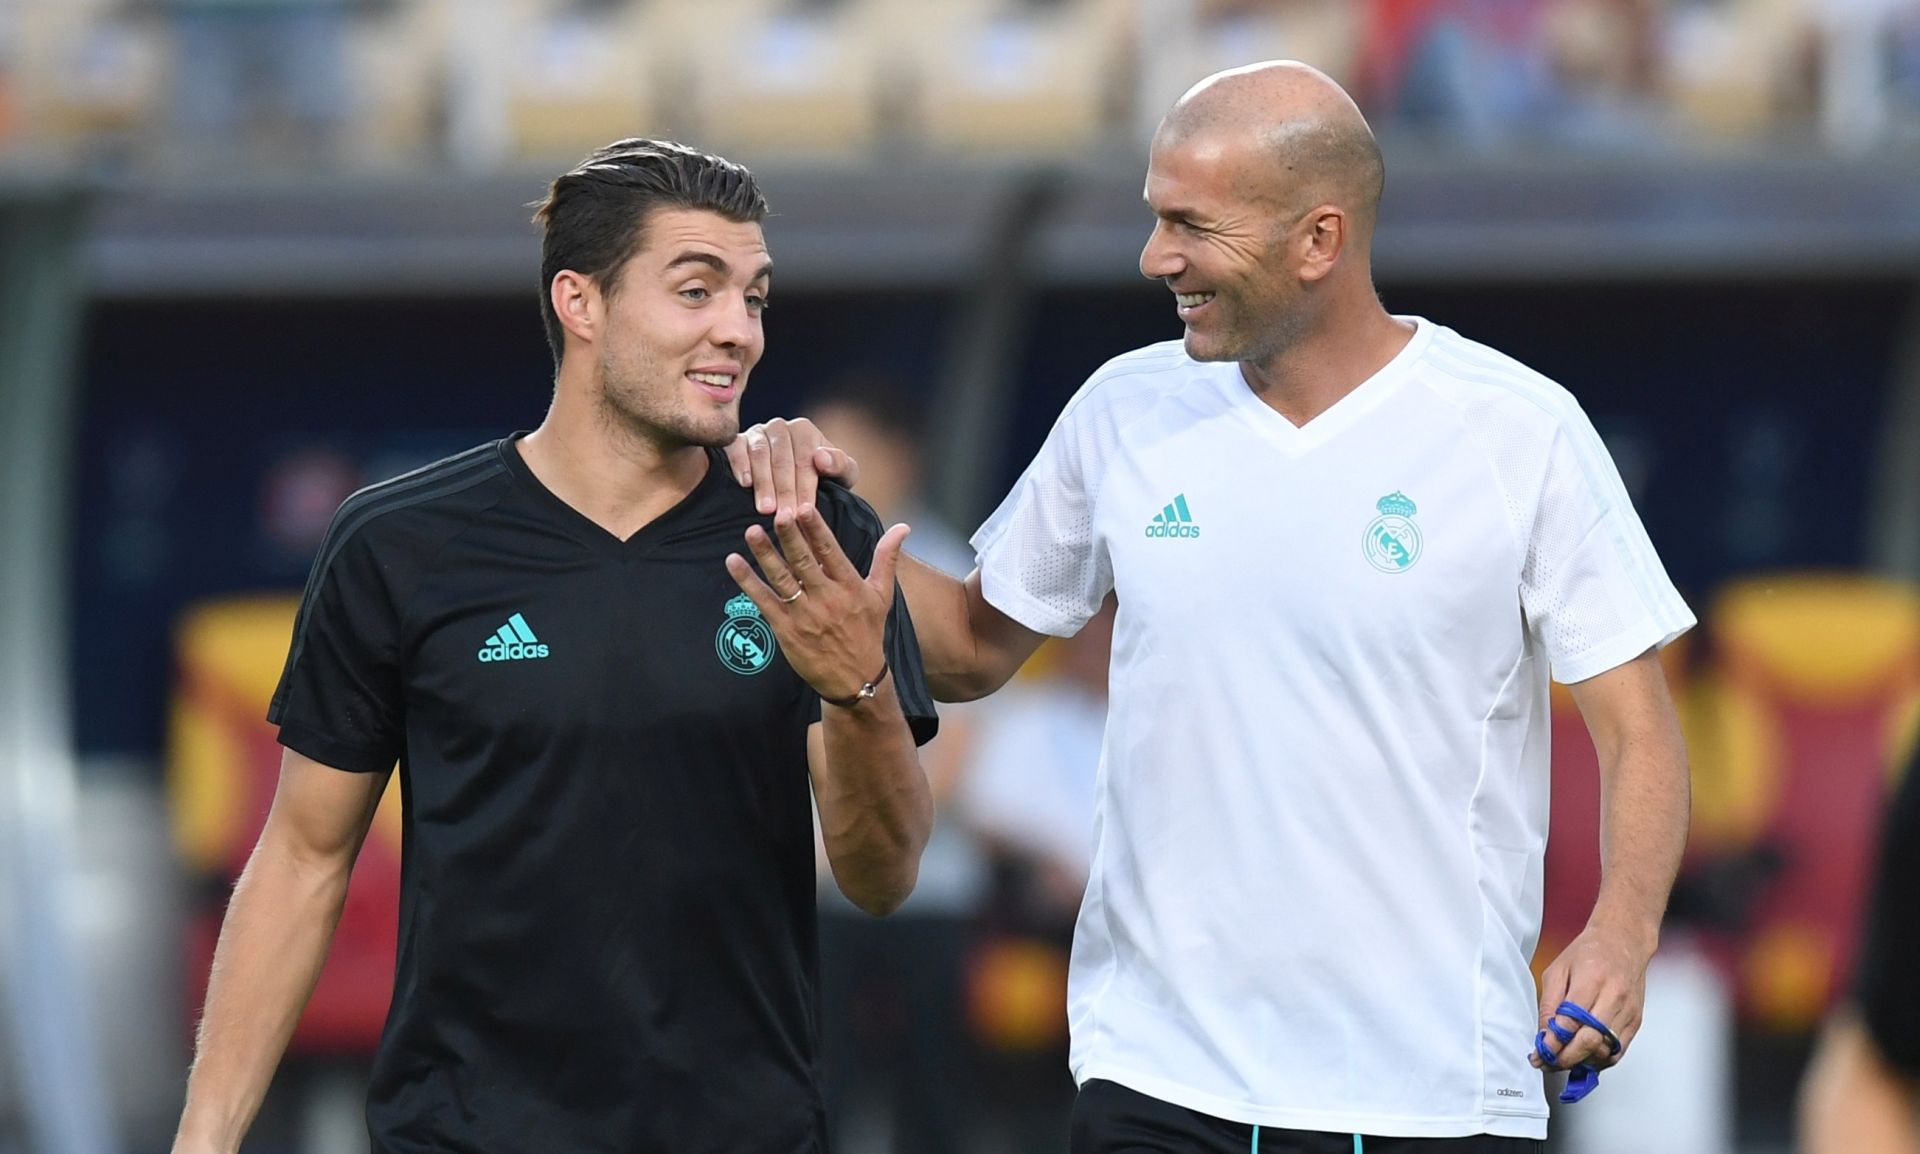 epa06130408 Real Madrid head coach Zinedine Zidane (R) talks with Mateo Kovacic during a training session at the Philip II Arena in Skopje, the Former Yugoslav Republic of Macedonia, 07 August 2017. Real Madrid will face Manchester United in the UEFA Super Cup Final on 08 August 2017.  EPA/GEORGI LICOVSKI